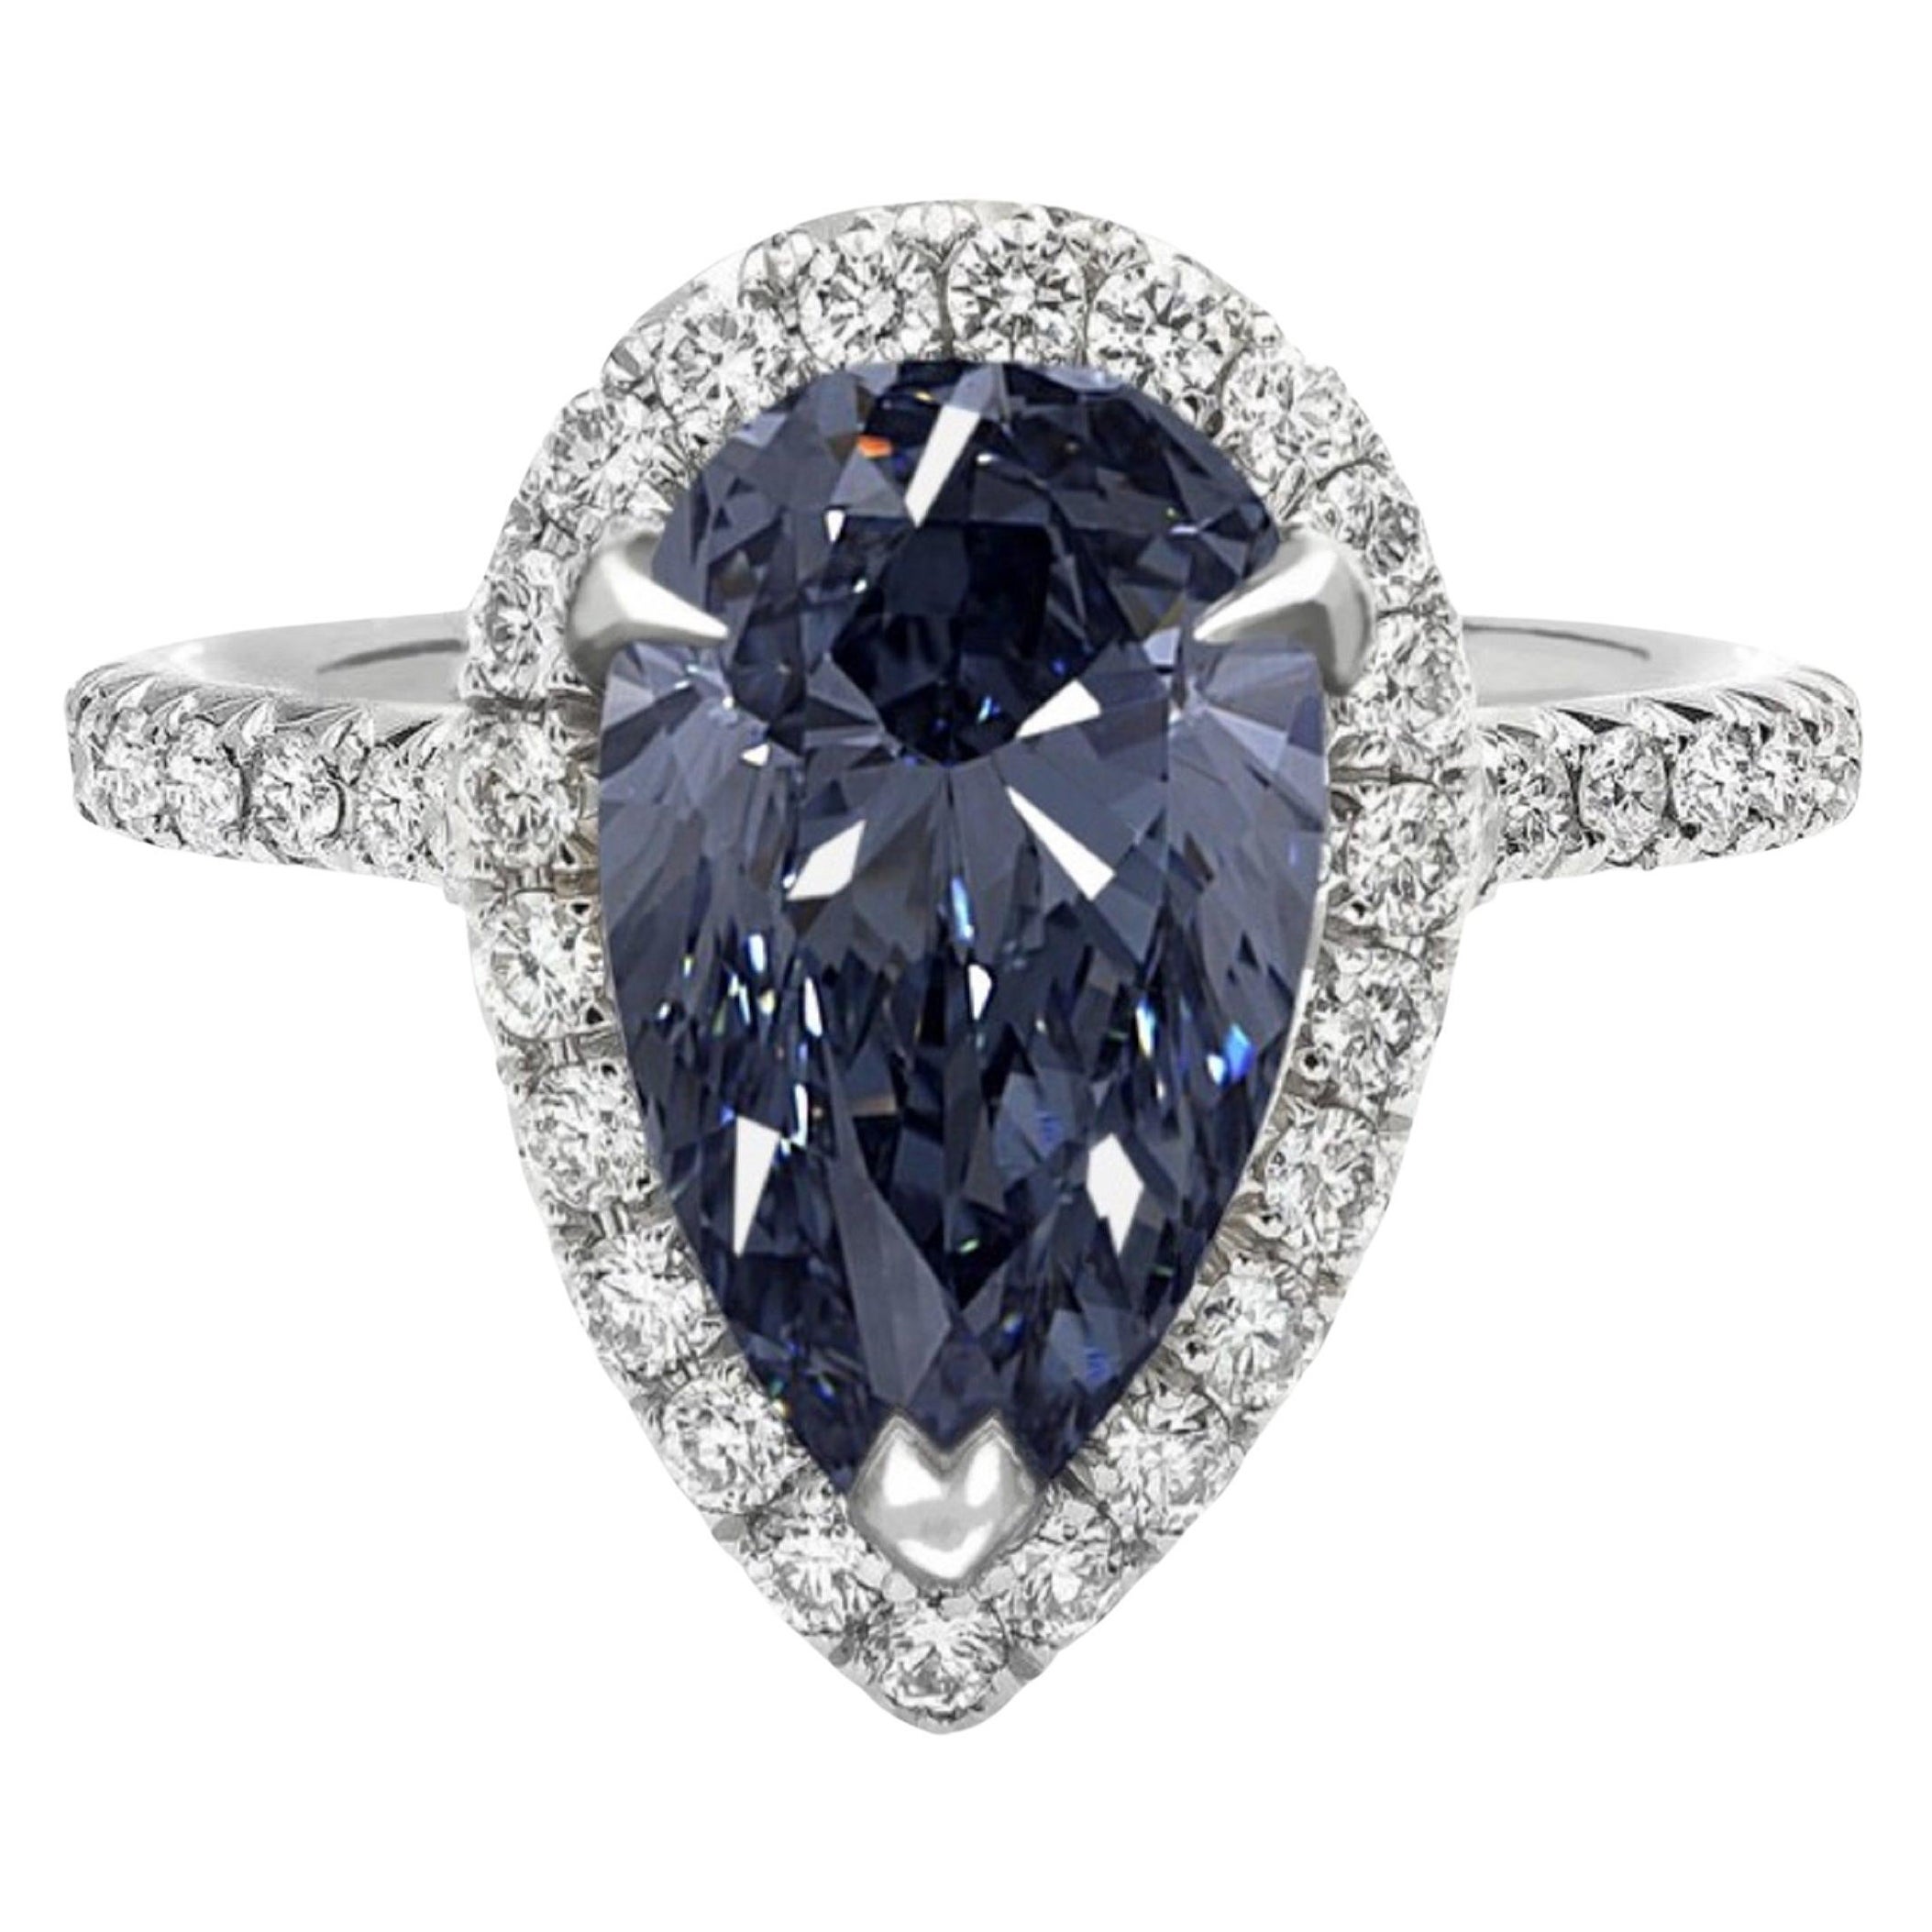 Exceptional GIA Certified 1 Carat Fancy Intense Blue Diamond Ring For Sale